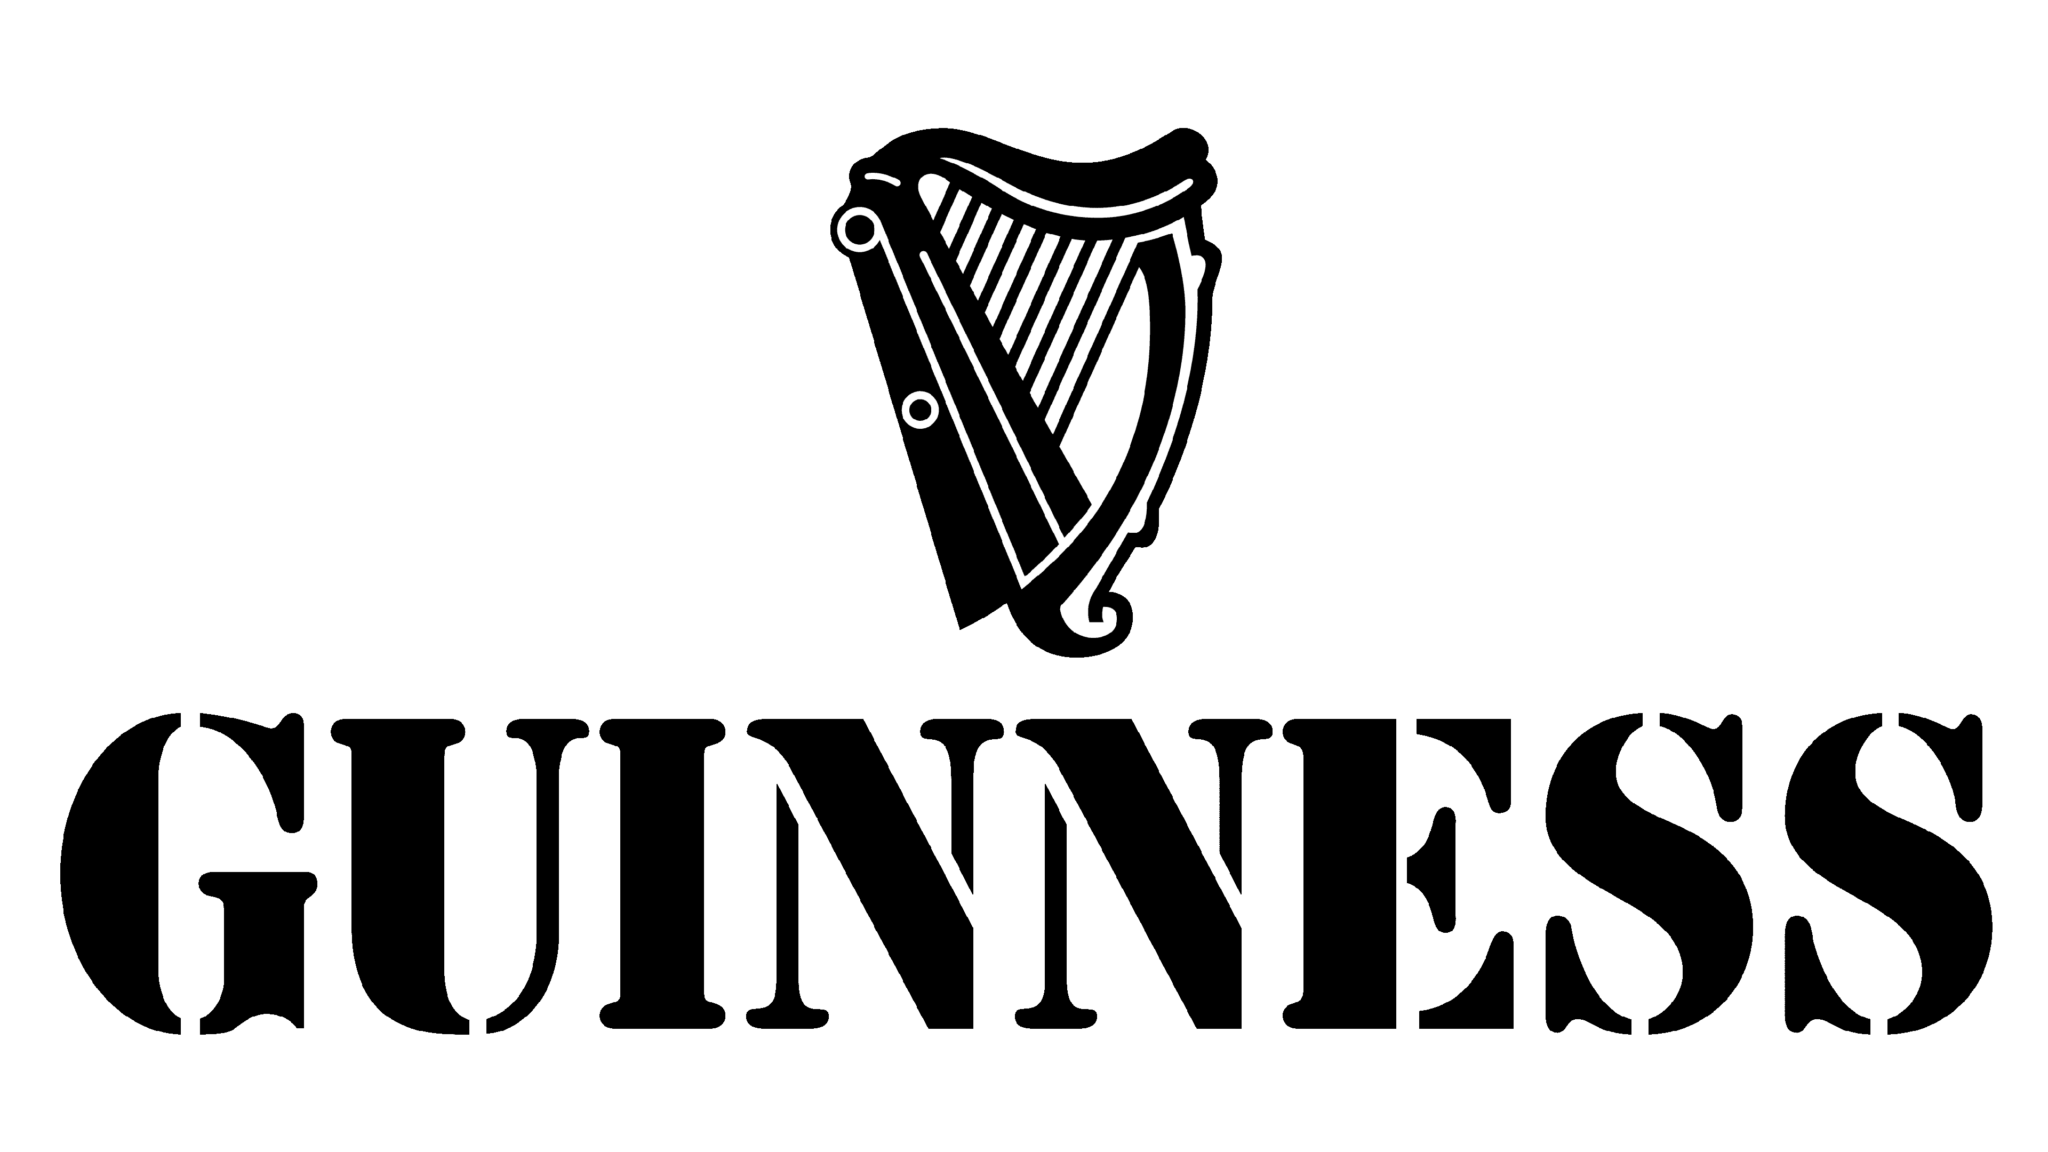 Guinness Logo and sign, new logo meaning and history, PNG, SVG